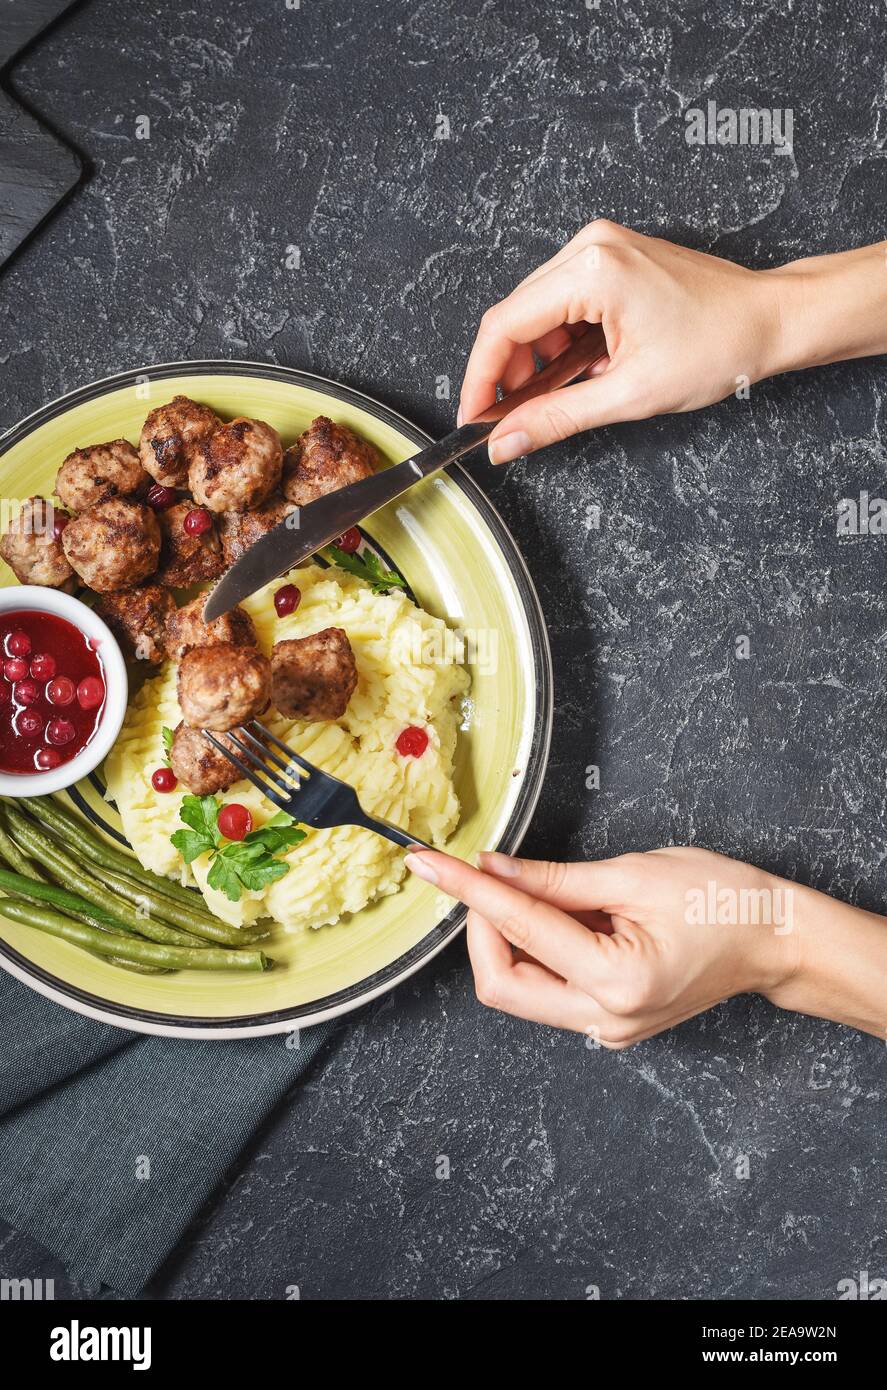 Swedish meatballs with mashed potatoes and green beans on black stone background. Female hands holds fork and knife. Top view Stock Photo